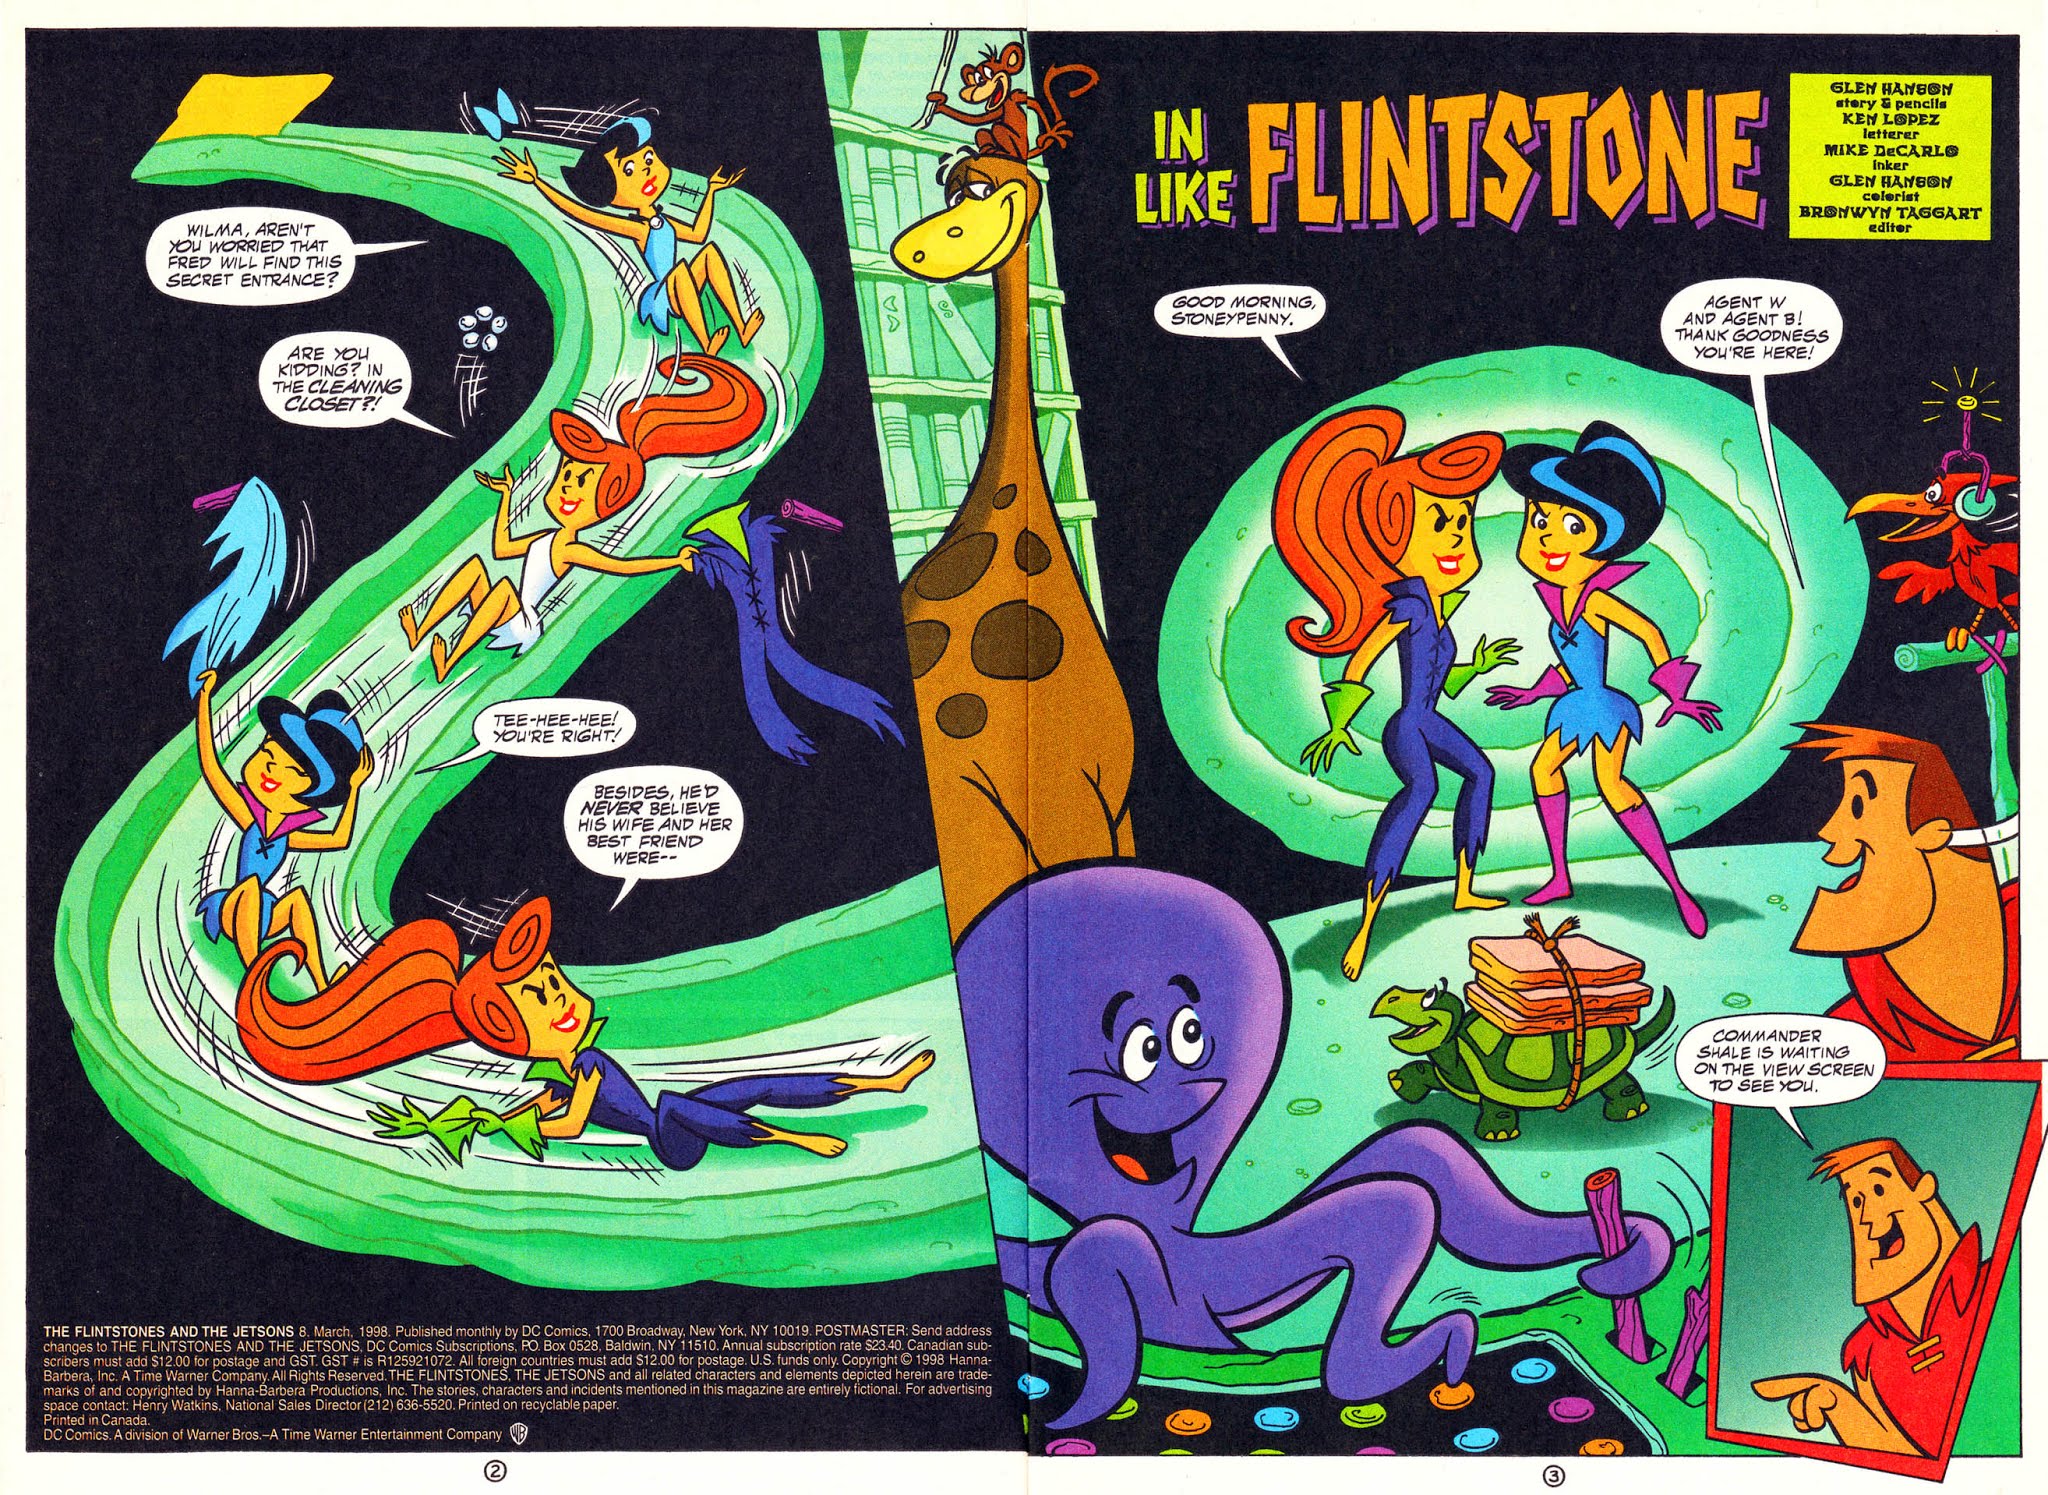 The Flintstones And The Jetsons Issue 8 | Read The Flintstones And The  Jetsons Issue 8 comic online in high quality. Read Full Comic online for  free - Read comics online in